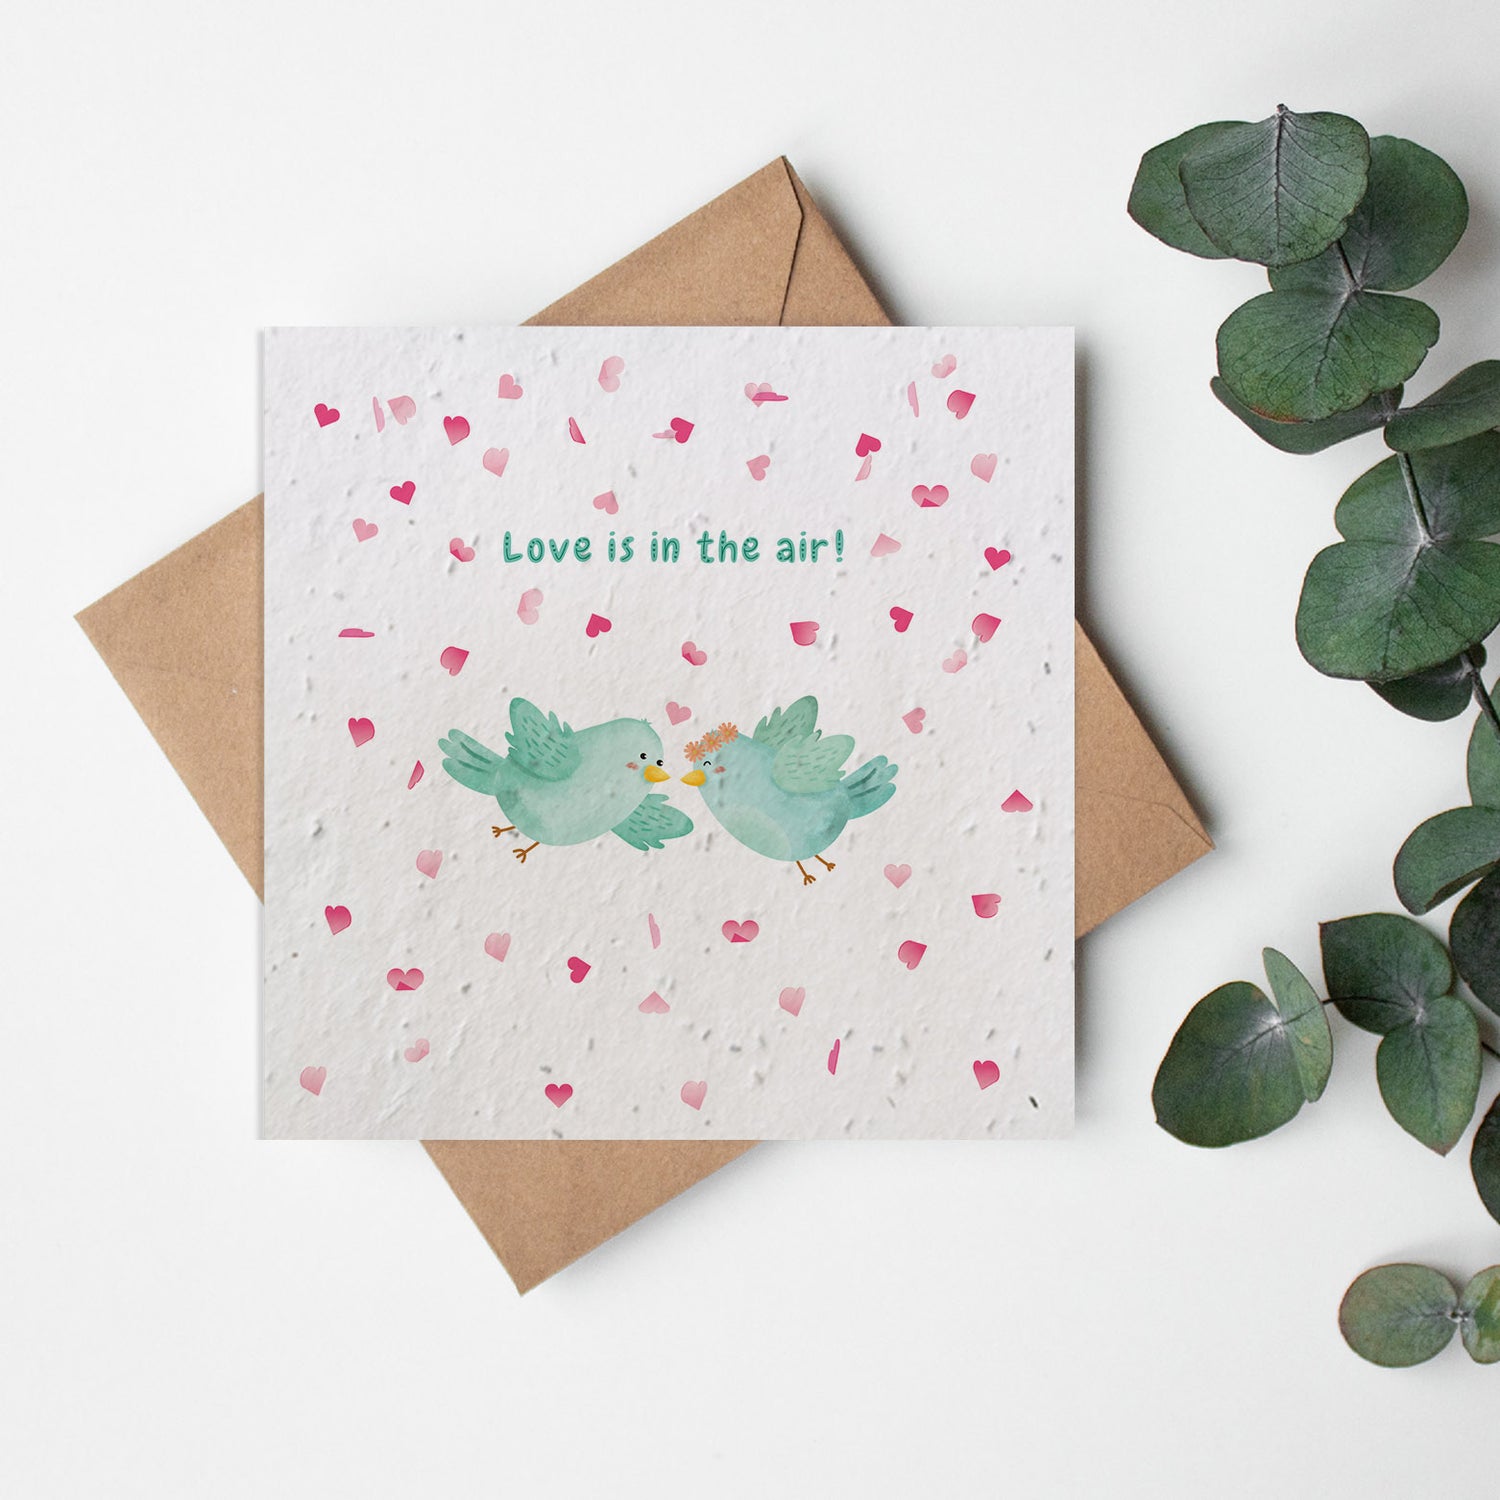 Valentine's Day Cards & Gifts